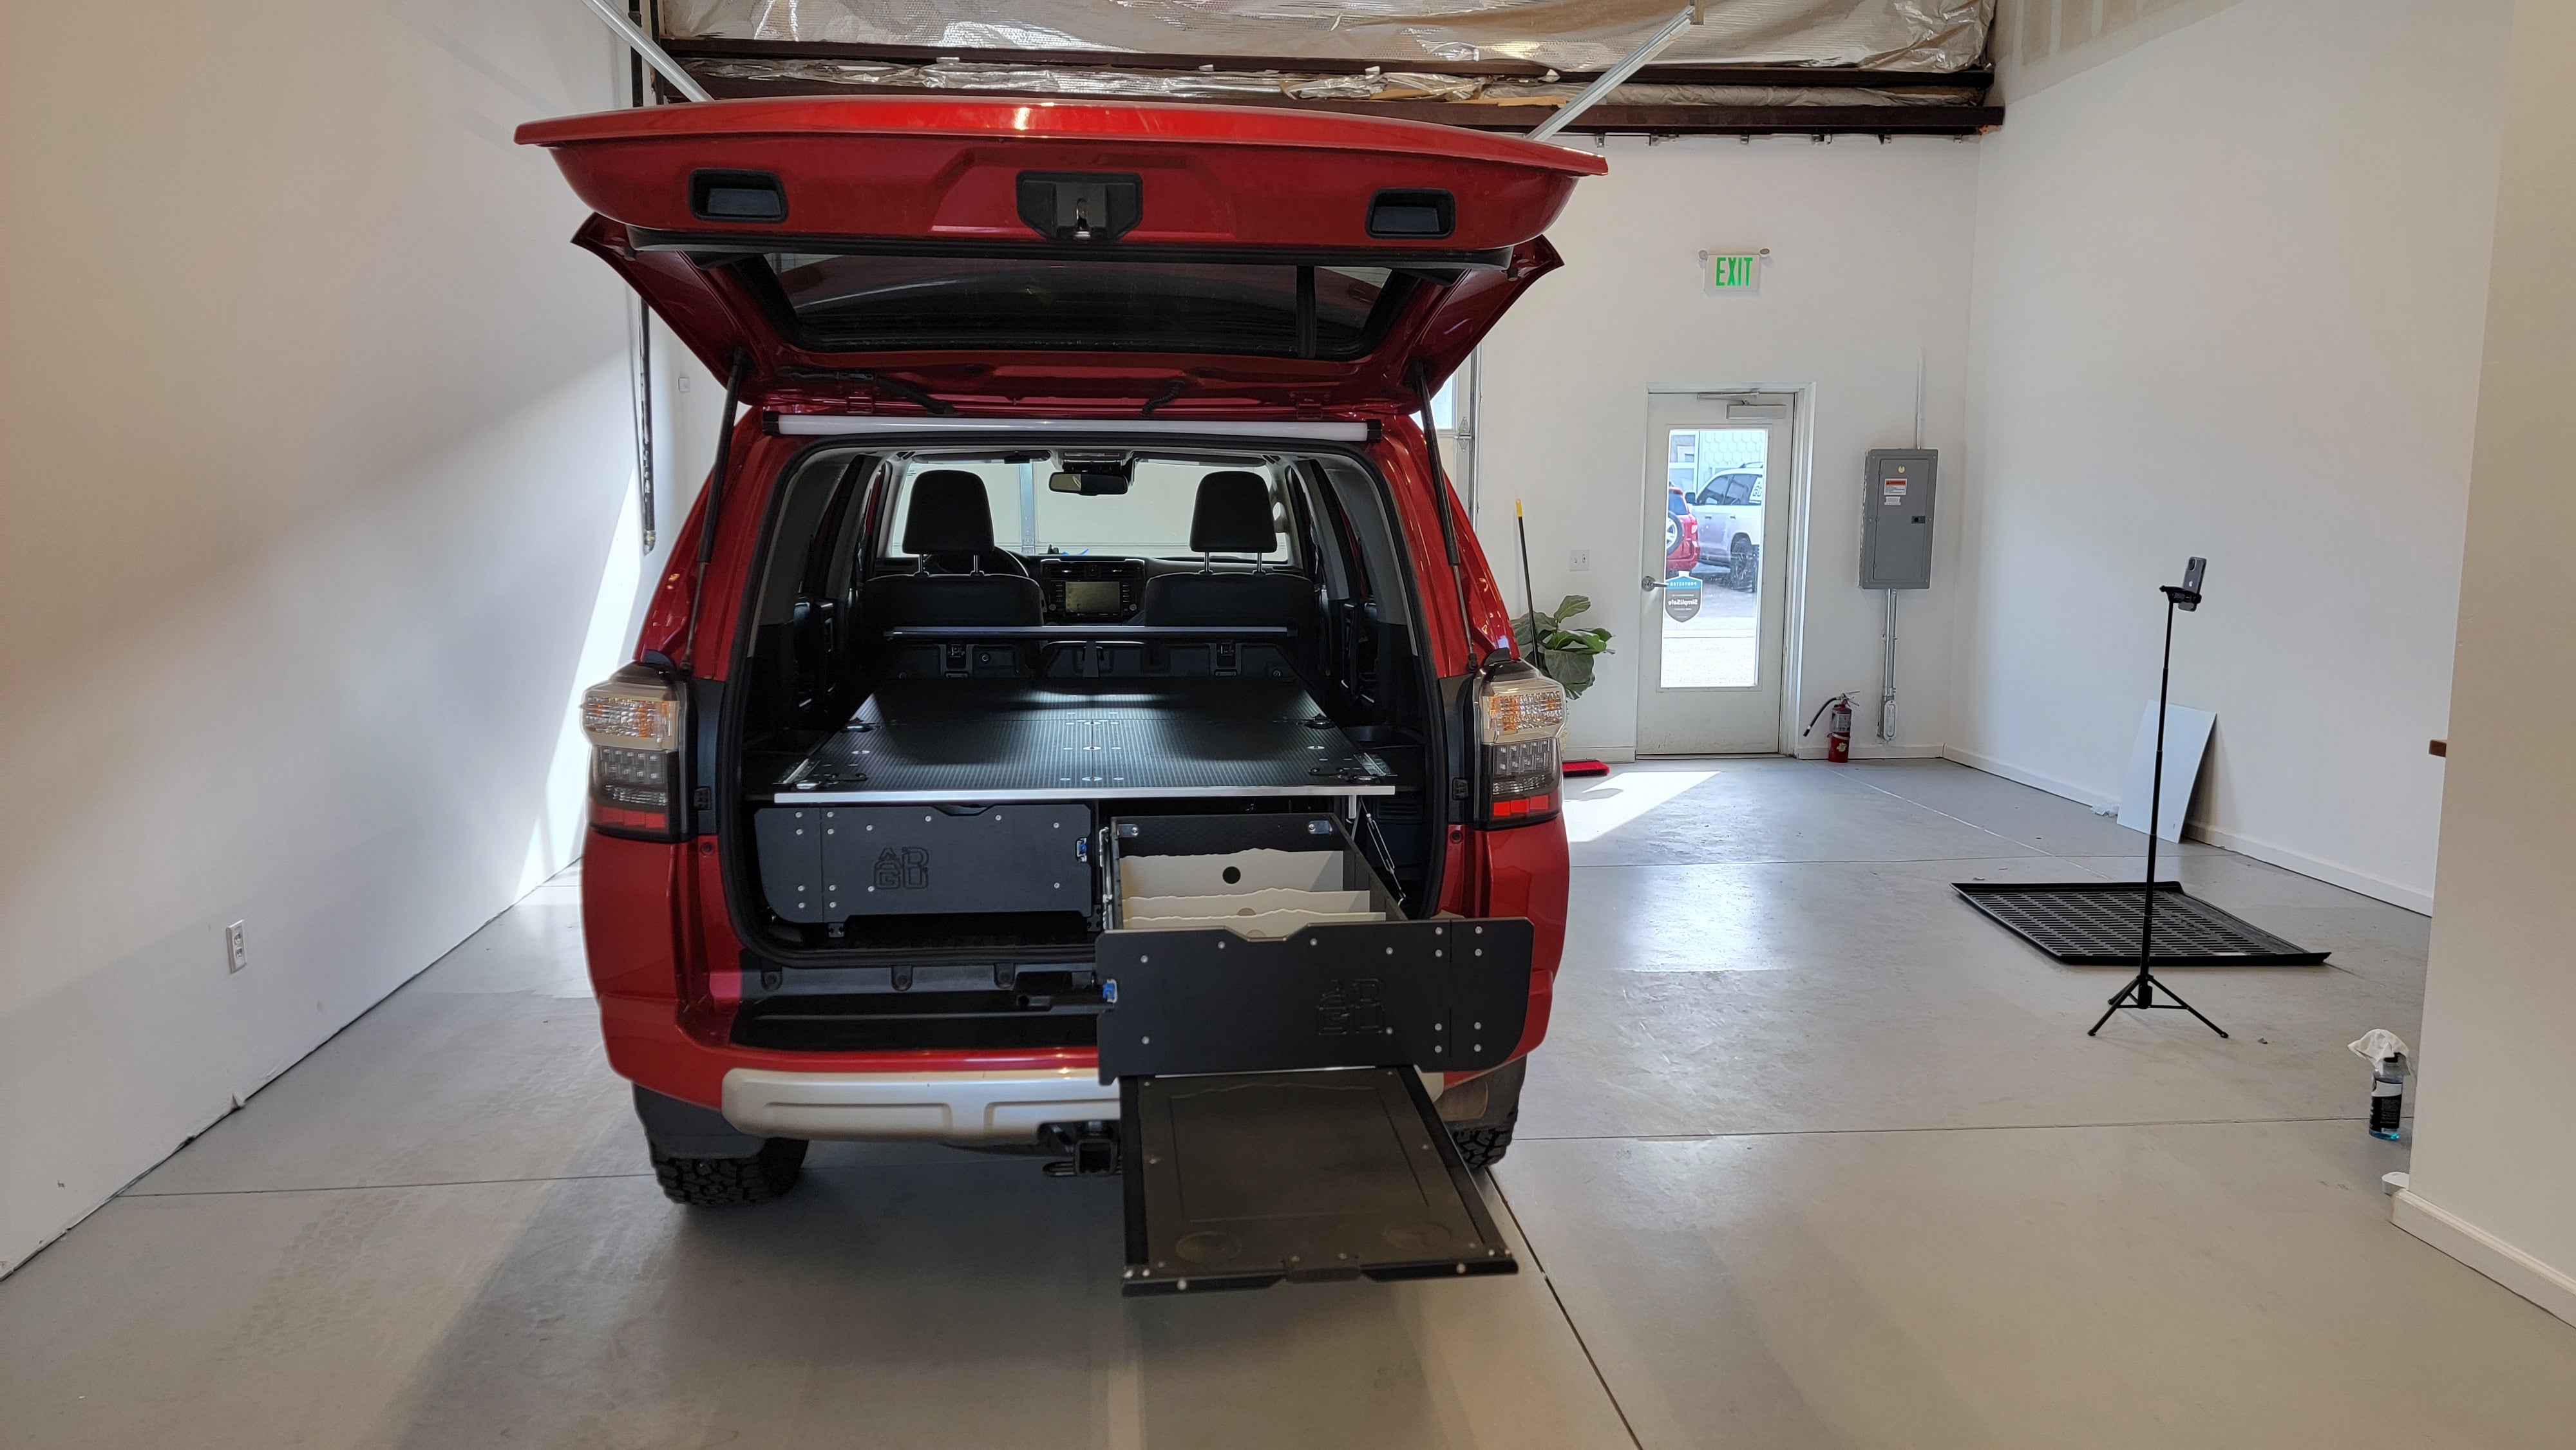   Patented Toyota 4Runner storage organization drawers and convertible sleeping platform  perfect for overland travel